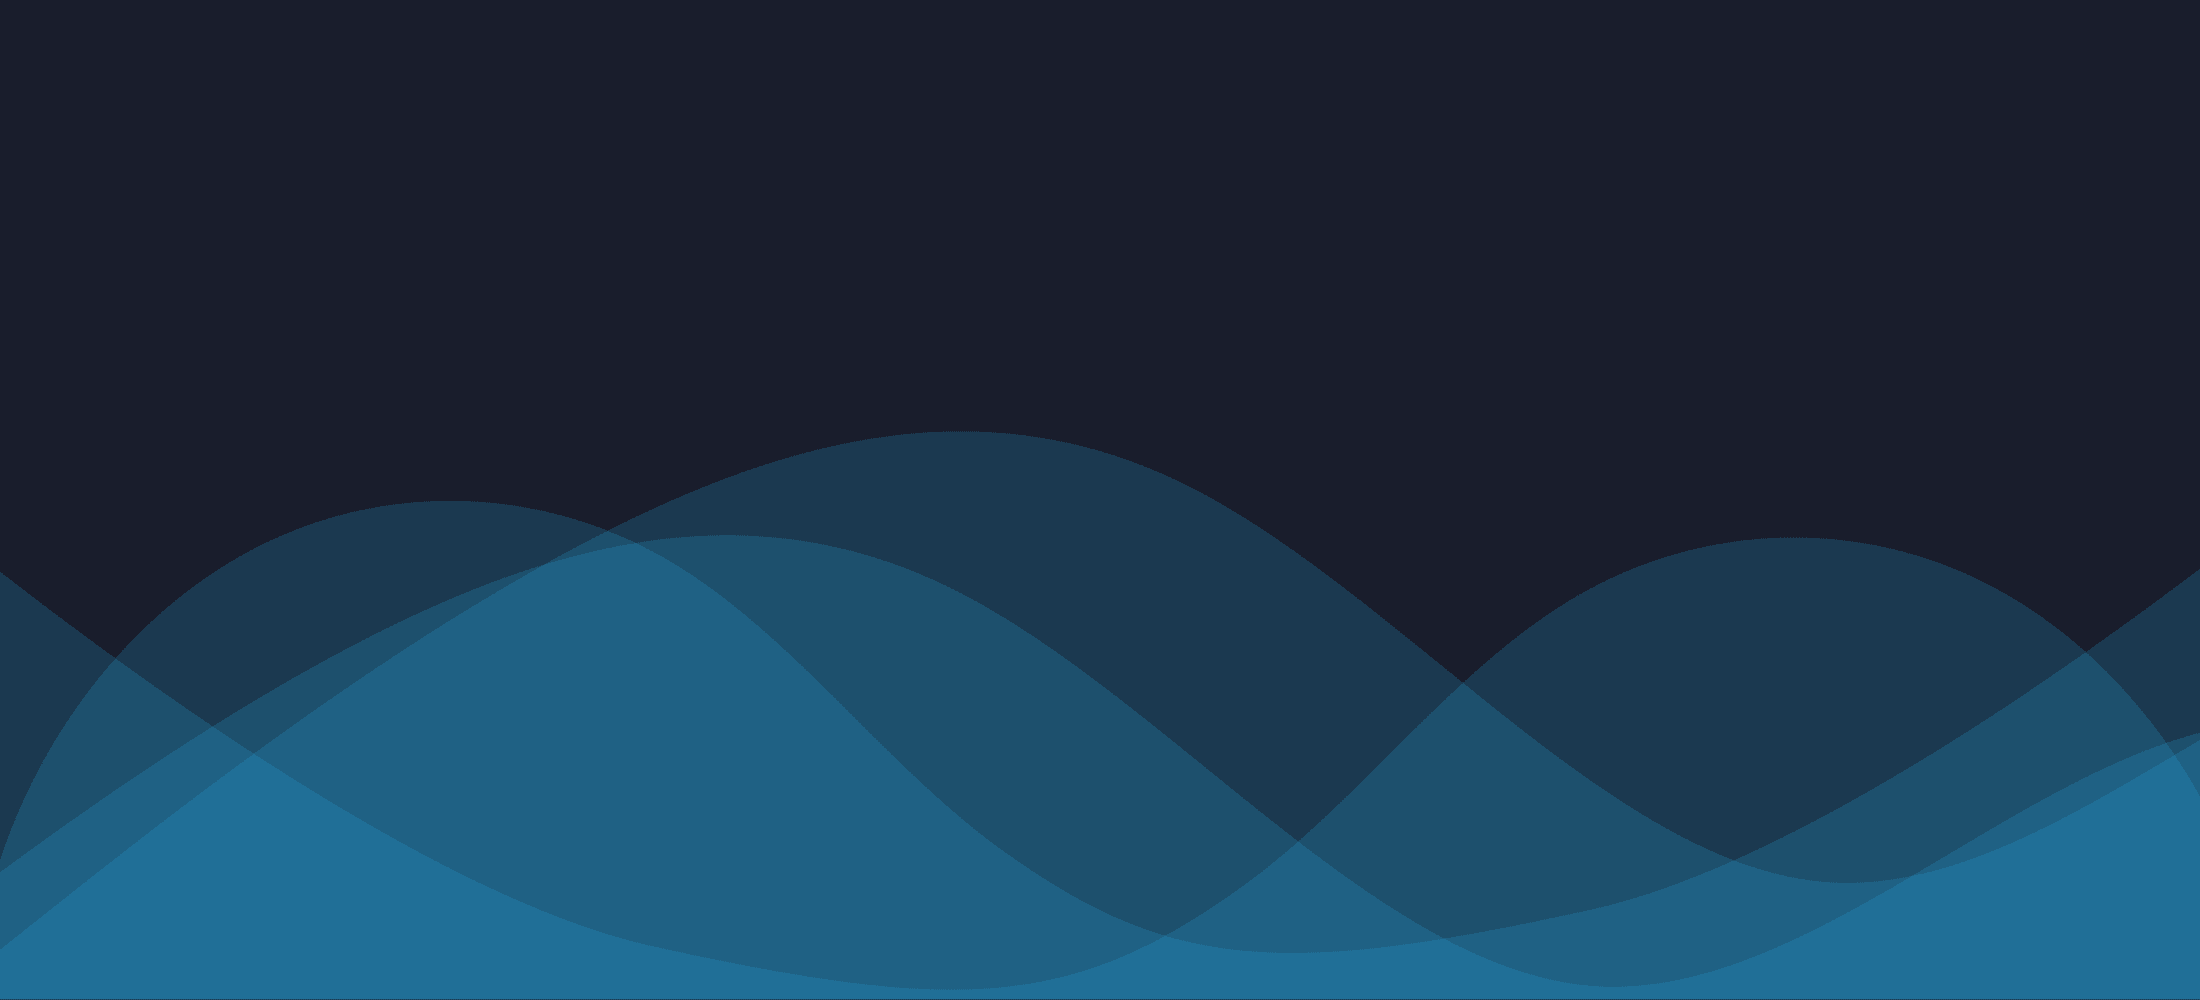 A minimalist geometric background with abstract blue waves on a dark blue backdrop.